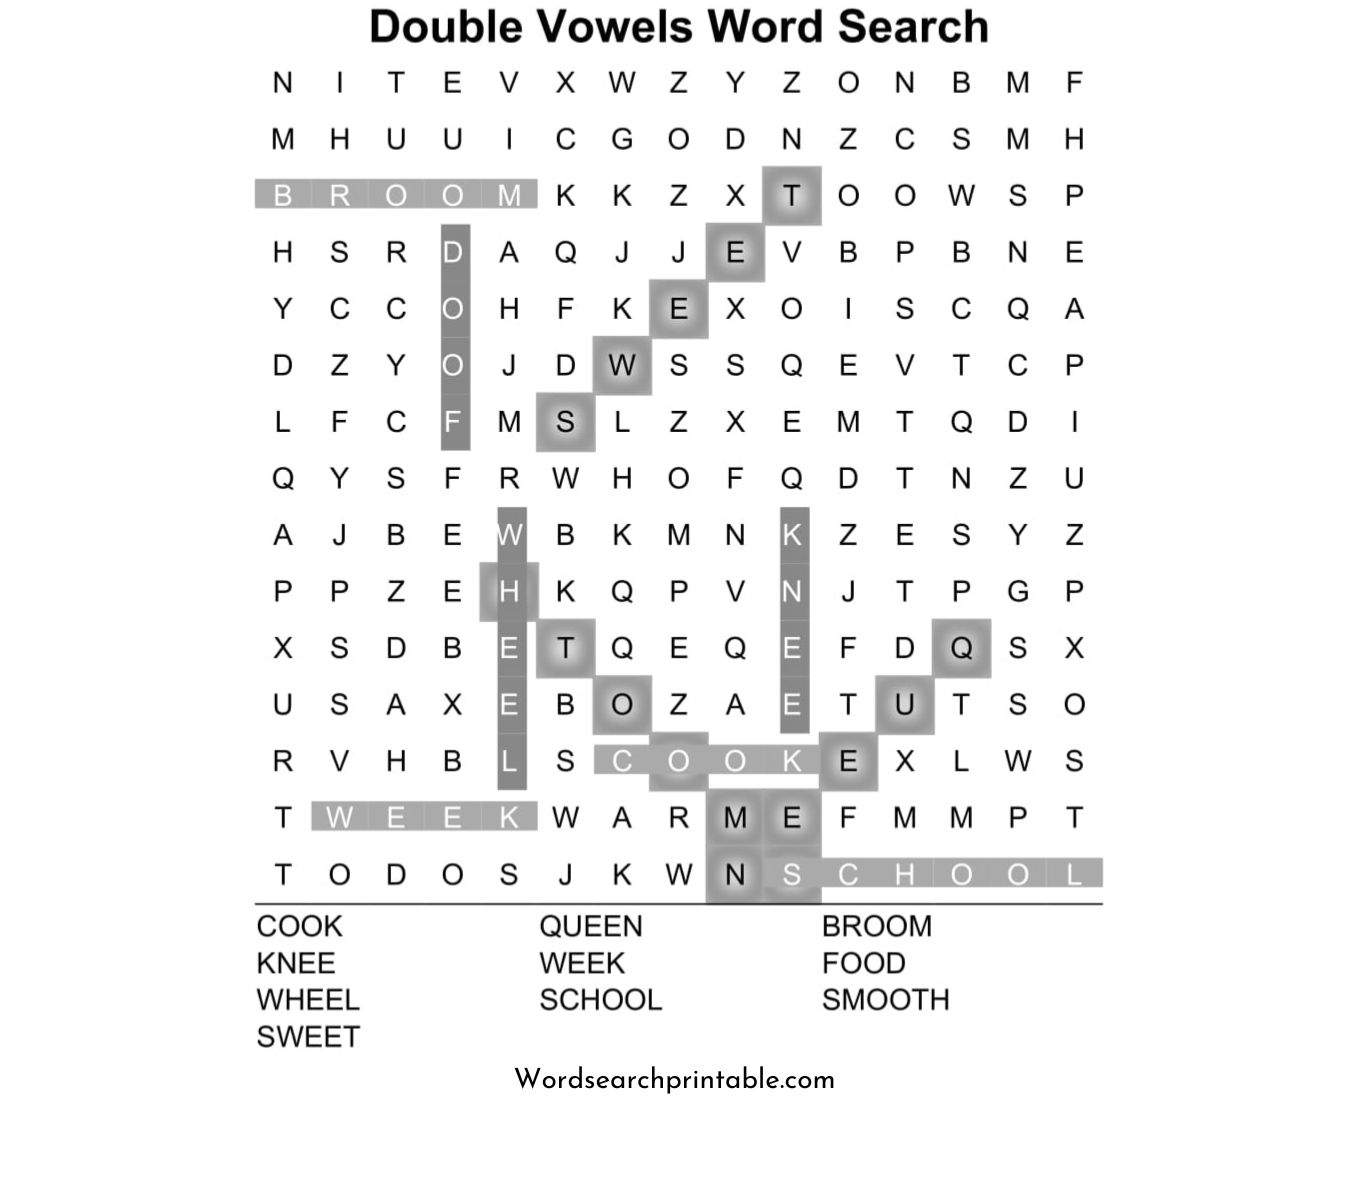 double vowels word search puzzle solution